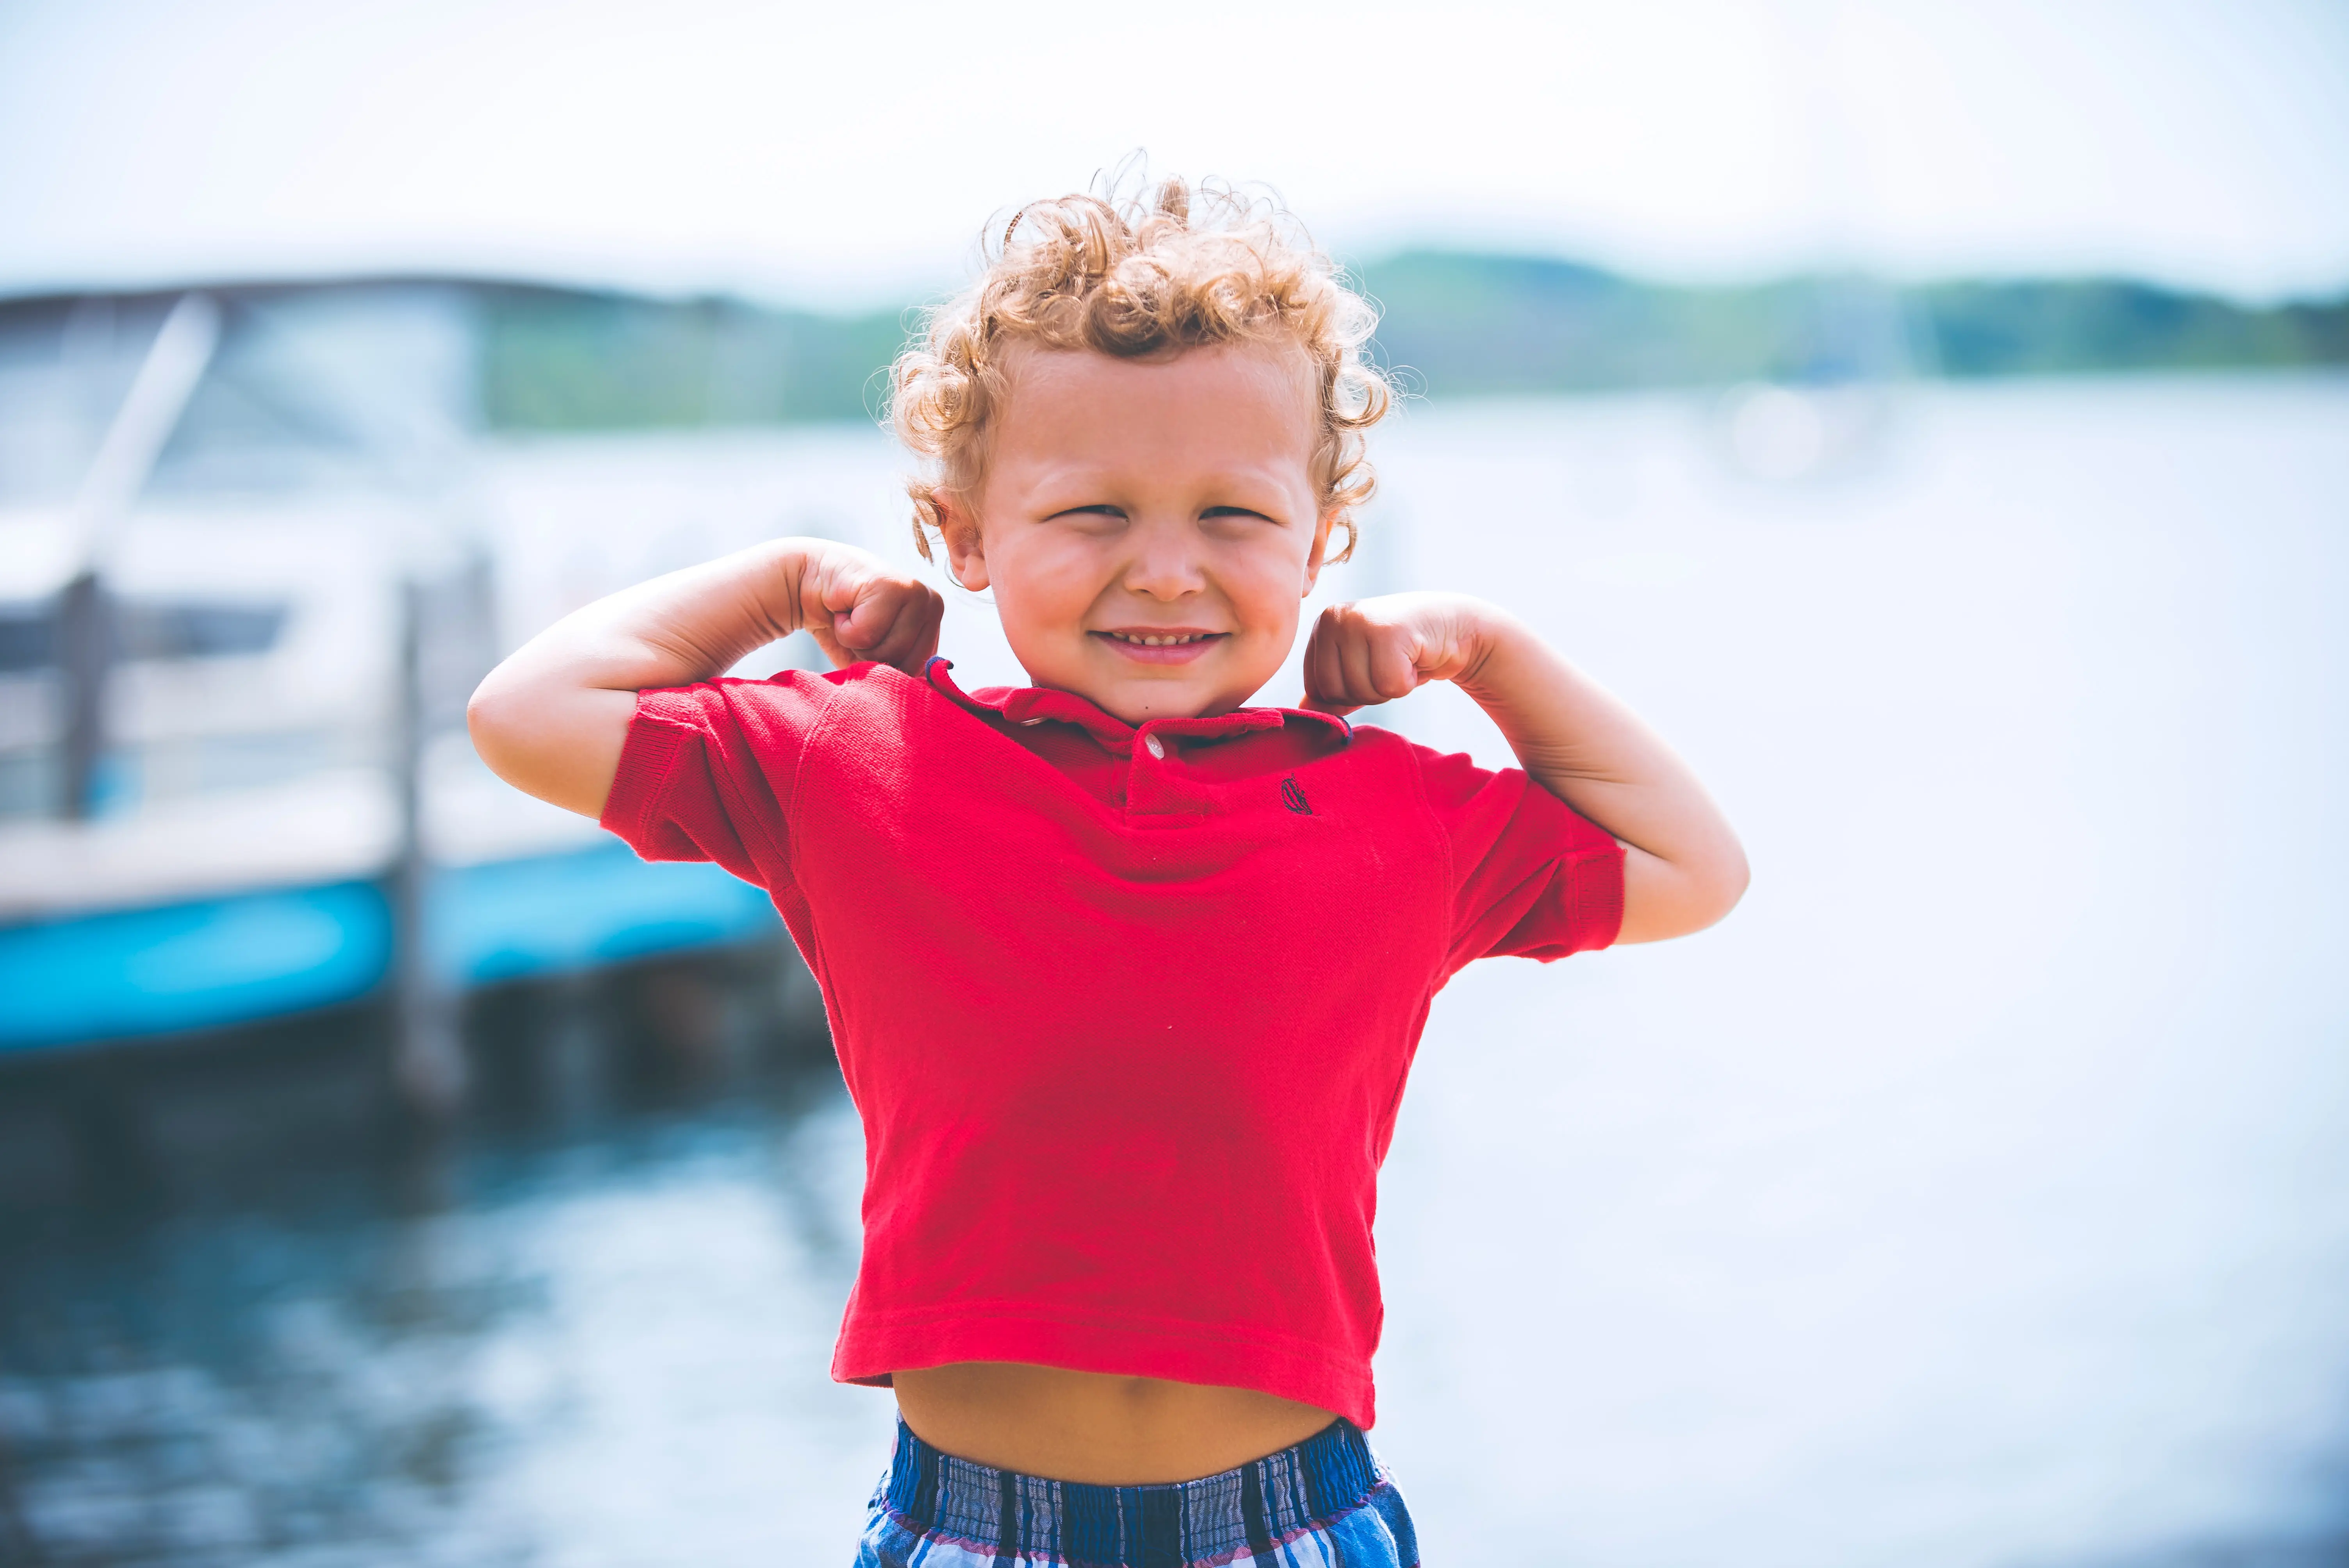 Curly haired boy in red polo standing in front of water.